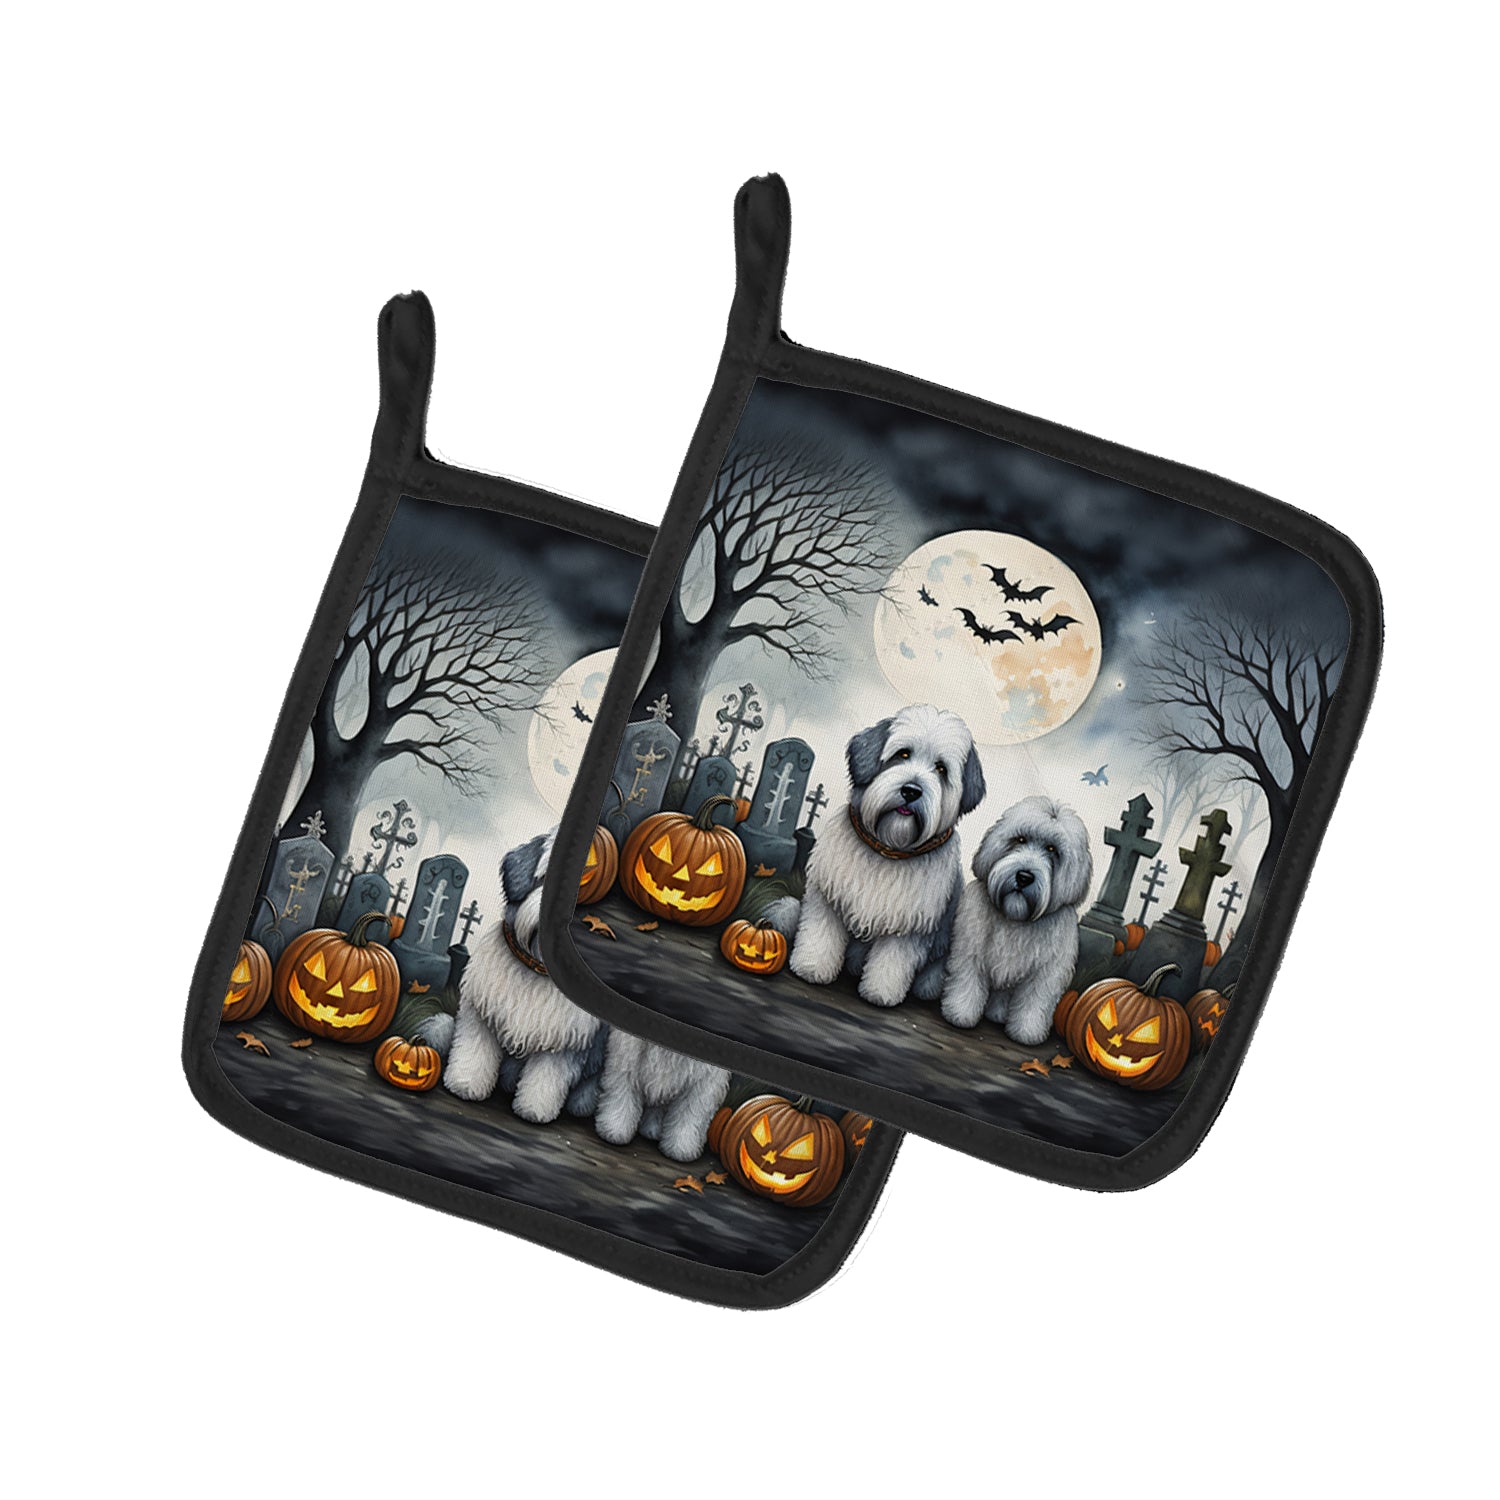 Buy this Old English Sheepdog Spooky Halloween Pair of Pot Holders